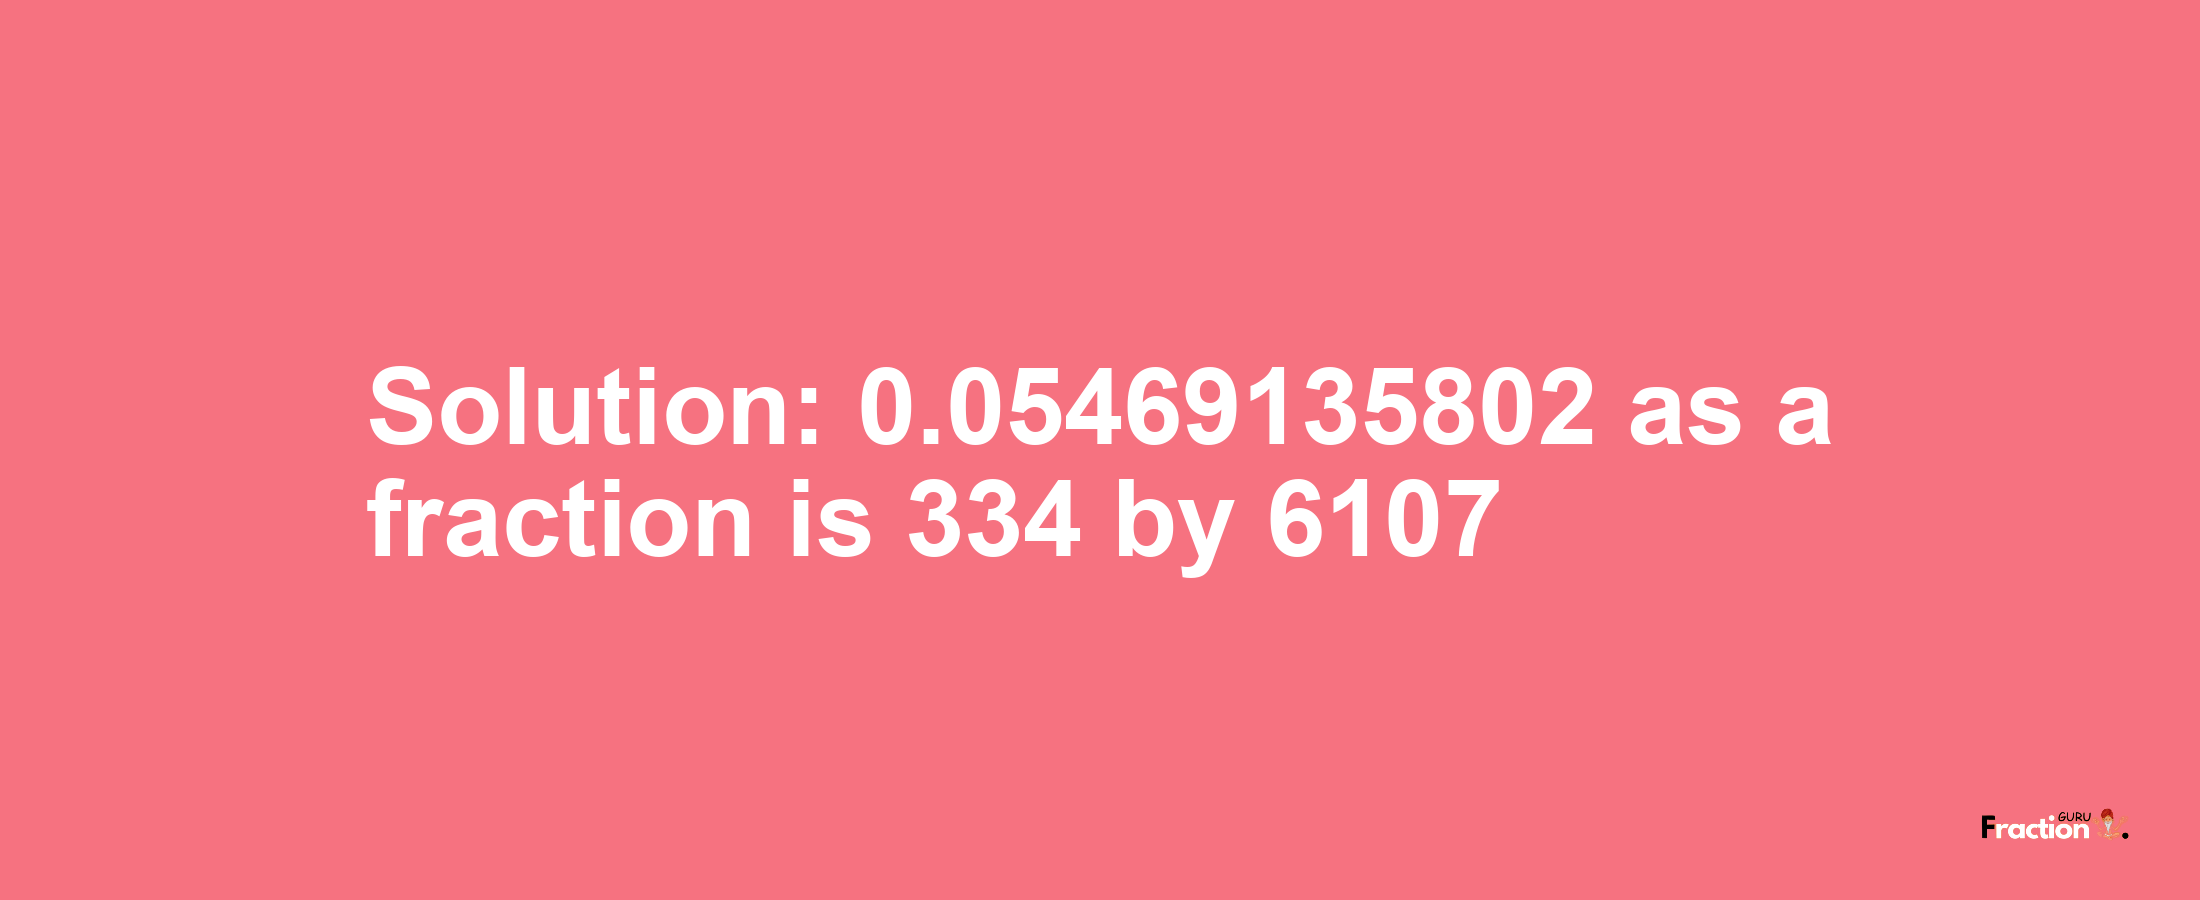 Solution:0.05469135802 as a fraction is 334/6107